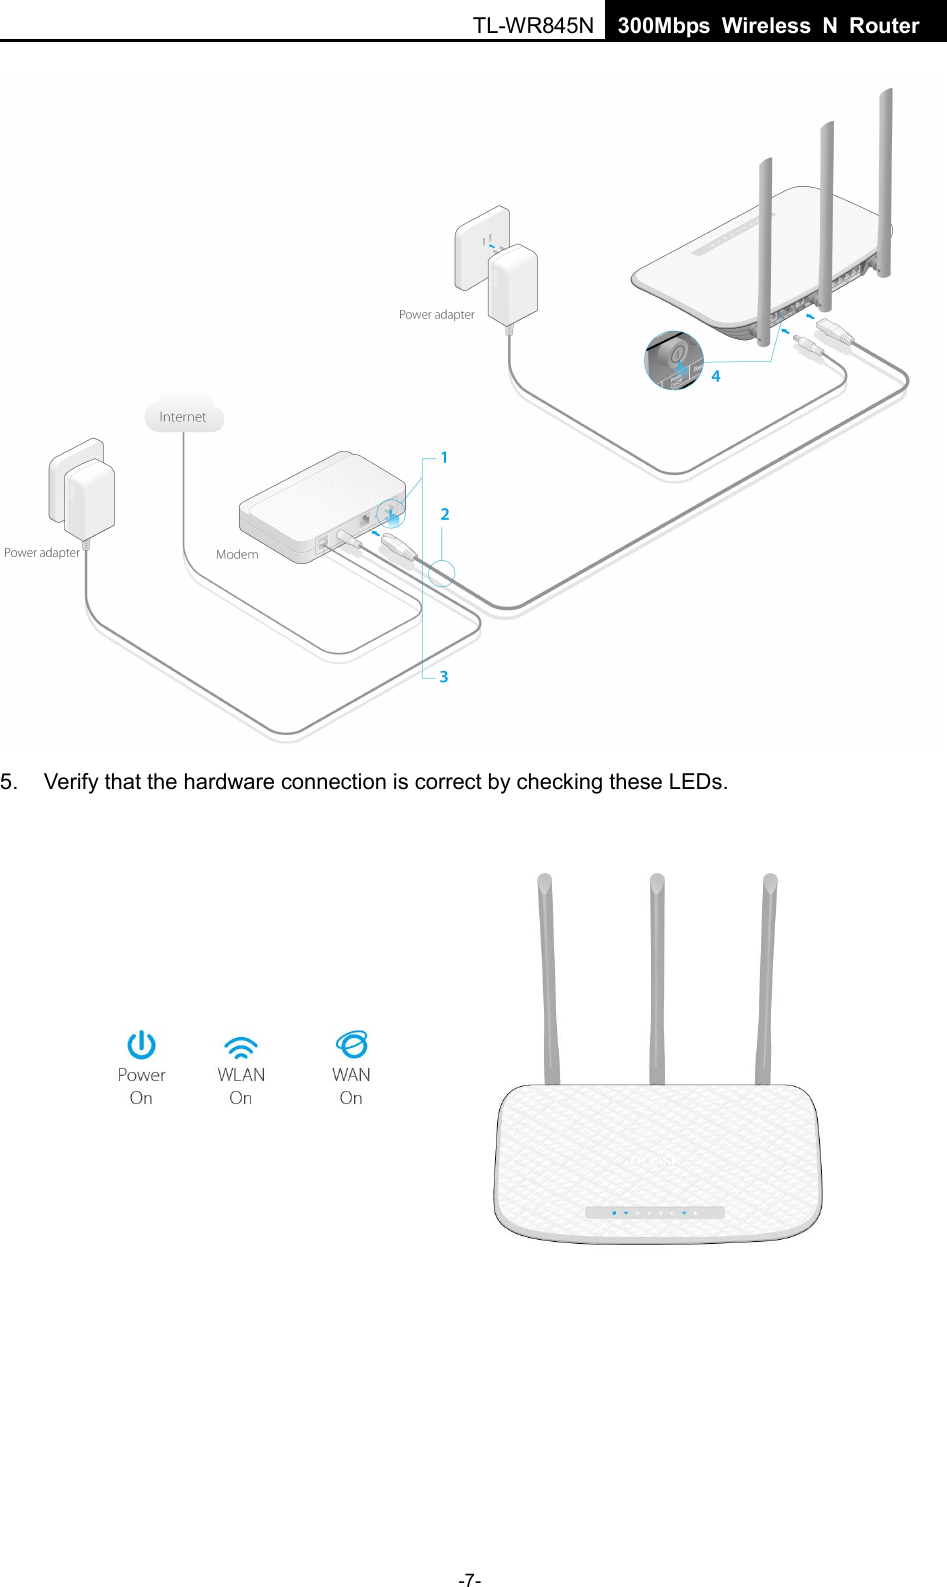  TL-WR845N  300Mbps Wireless N Router     5. Verify that the hardware connection is correct by checking these LEDs.   -7- 